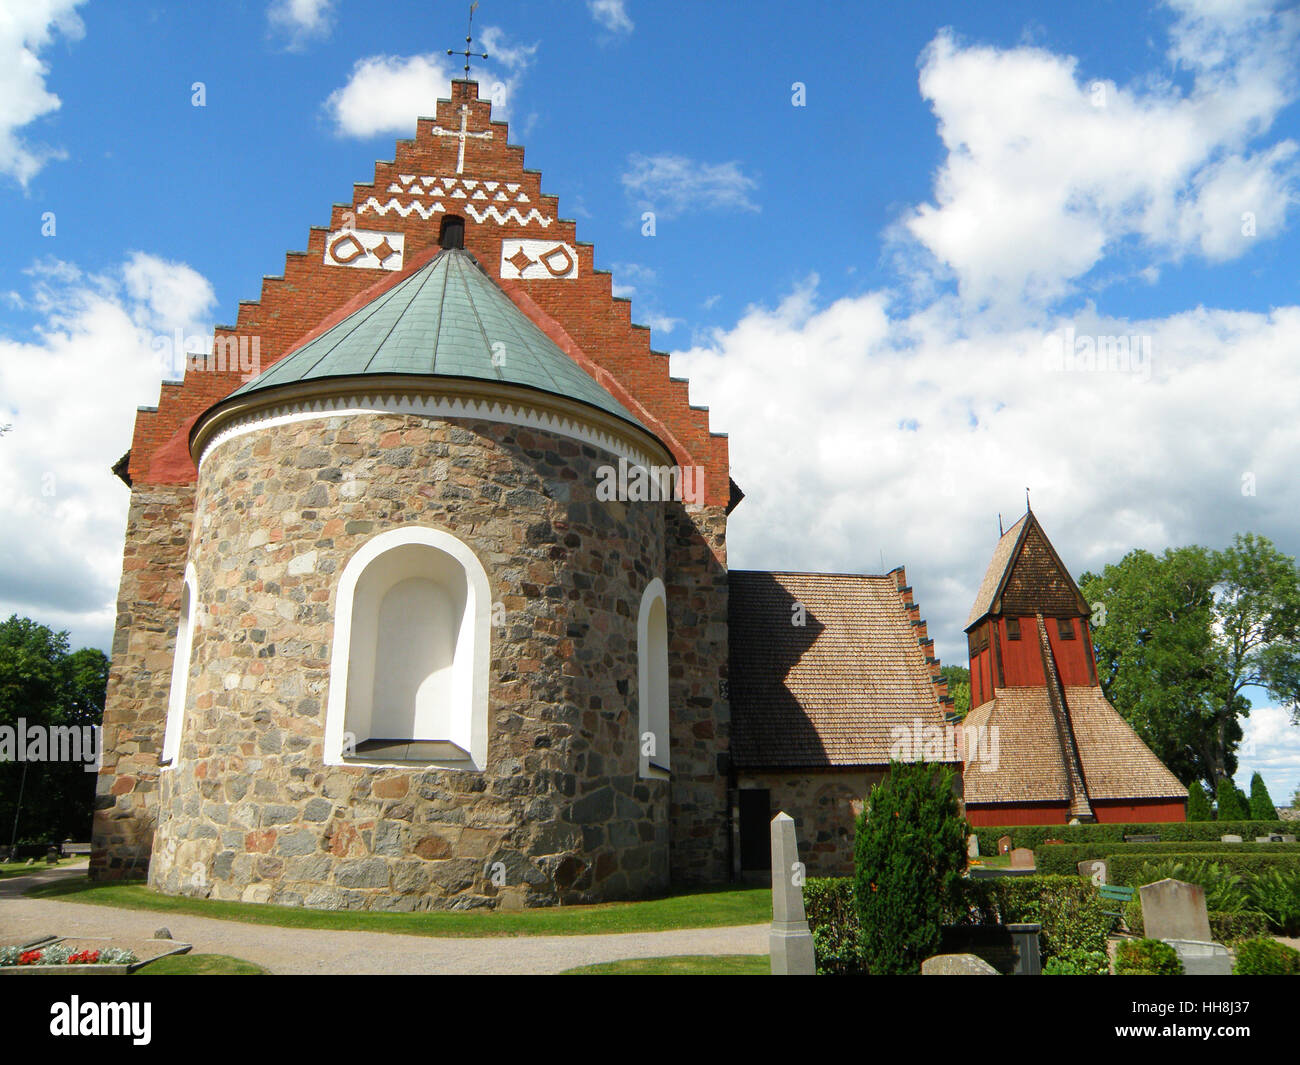 Stunning Gamla Uppsala Kyrka (Old Church) and the Bell Tower in the Old Town of Uppsala, Sweden, Scandinavia Stock Photo